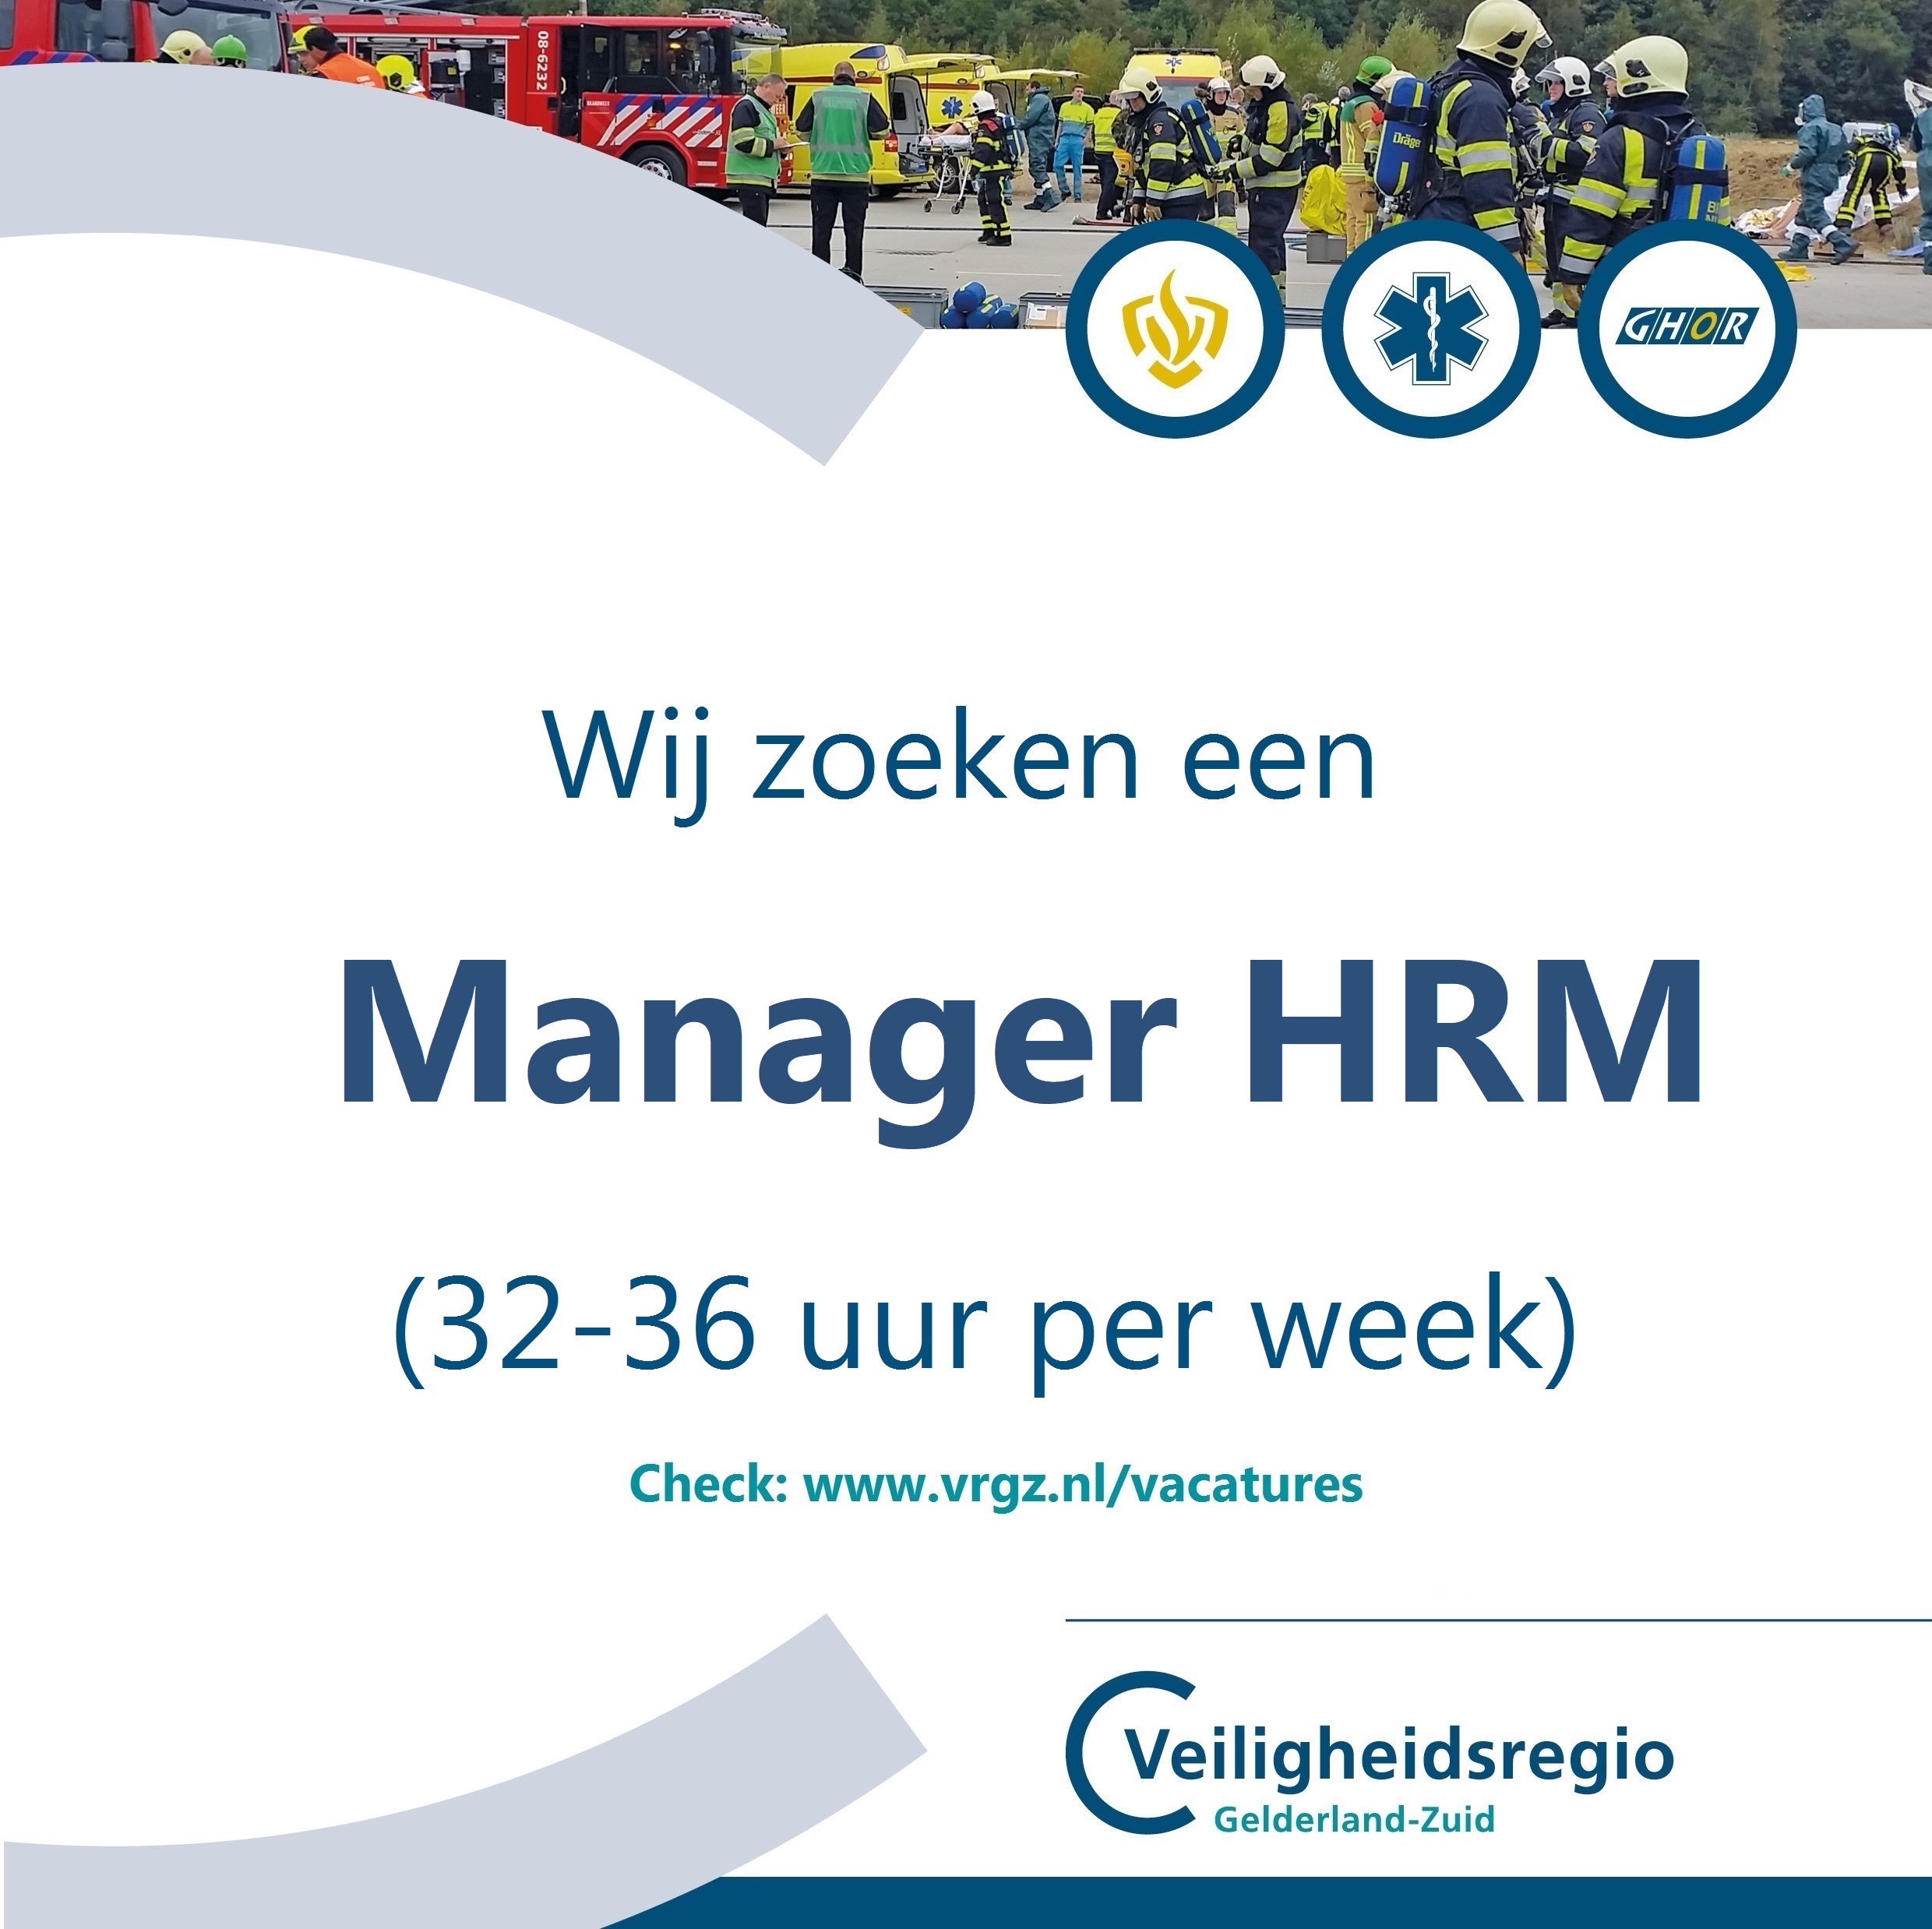 Vacature manager HRM.jpg